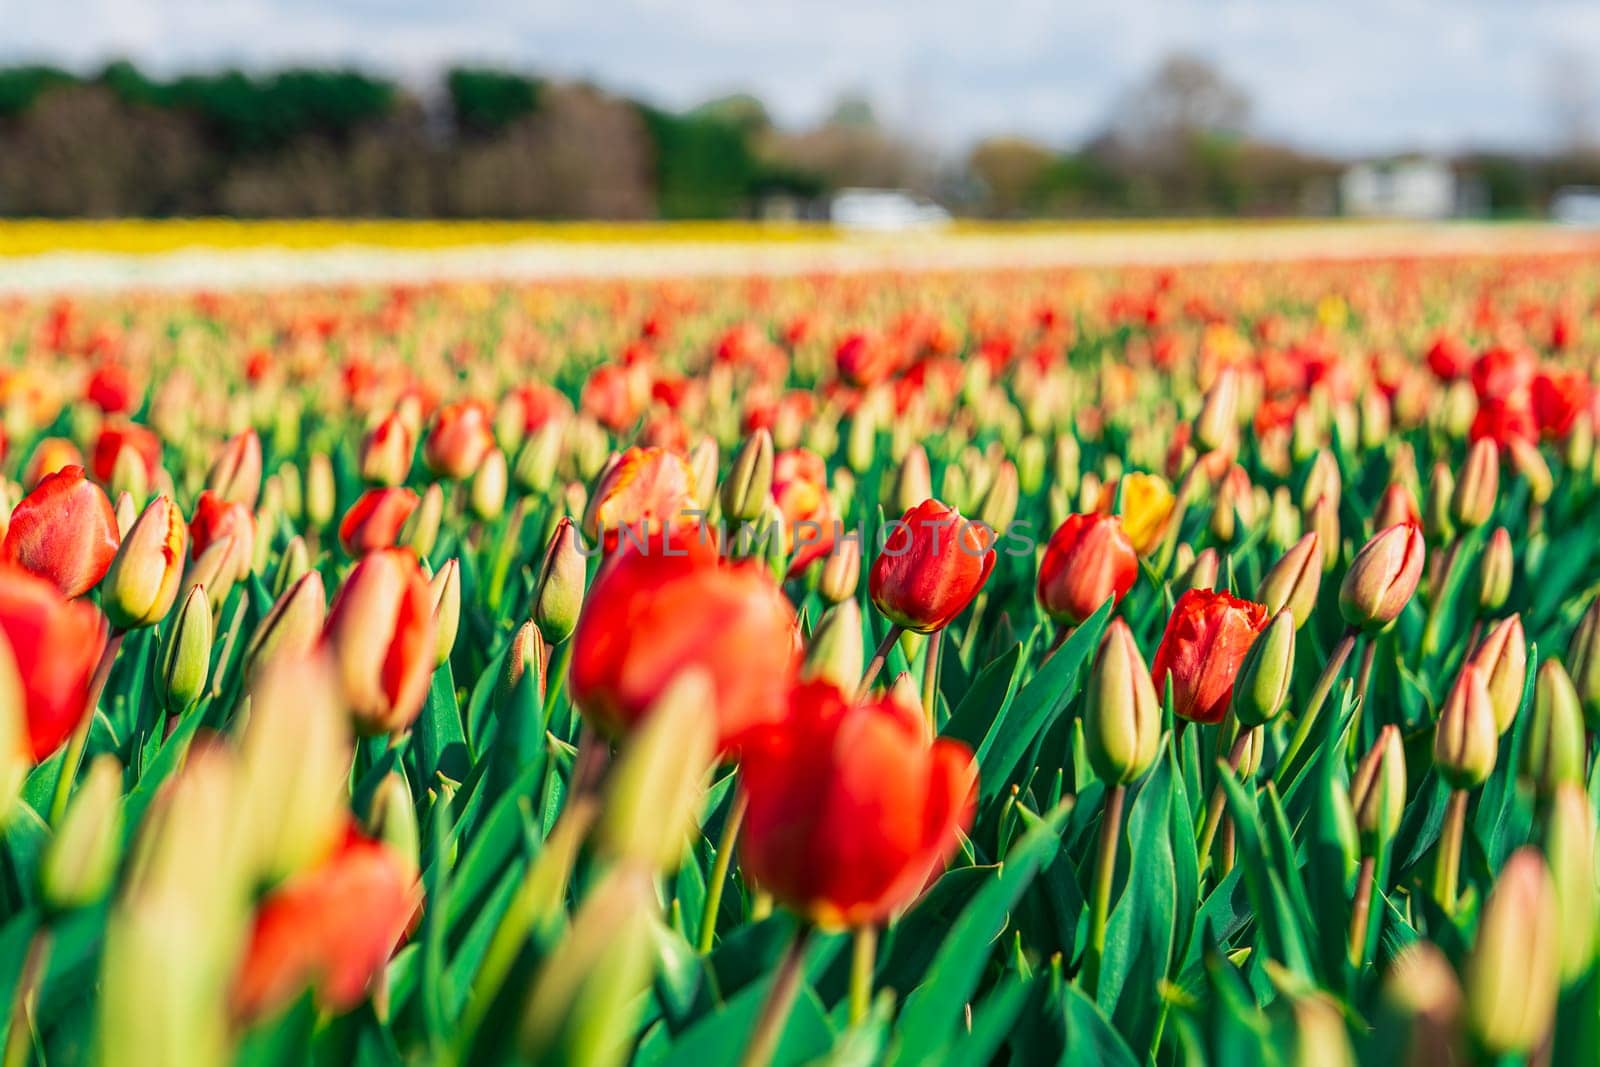 Scenic View of the Netherlands: Endless Field of Red and Yellow Tulips by PhotoTime